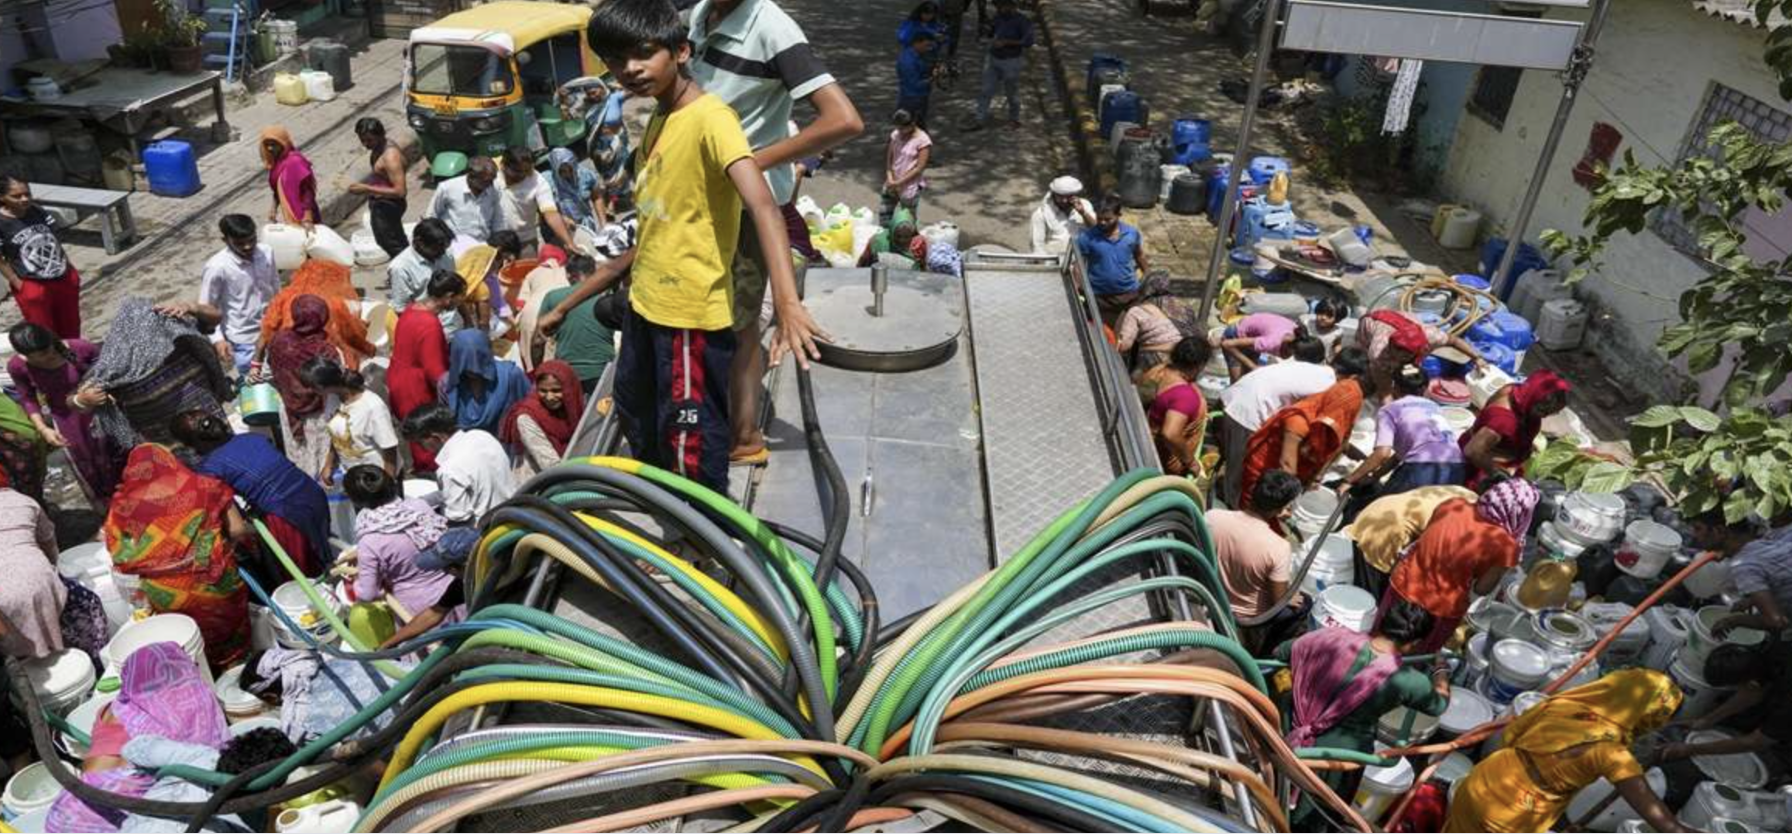 Delhi Water Crisis: City Has Already Extracted 99% Groundwater